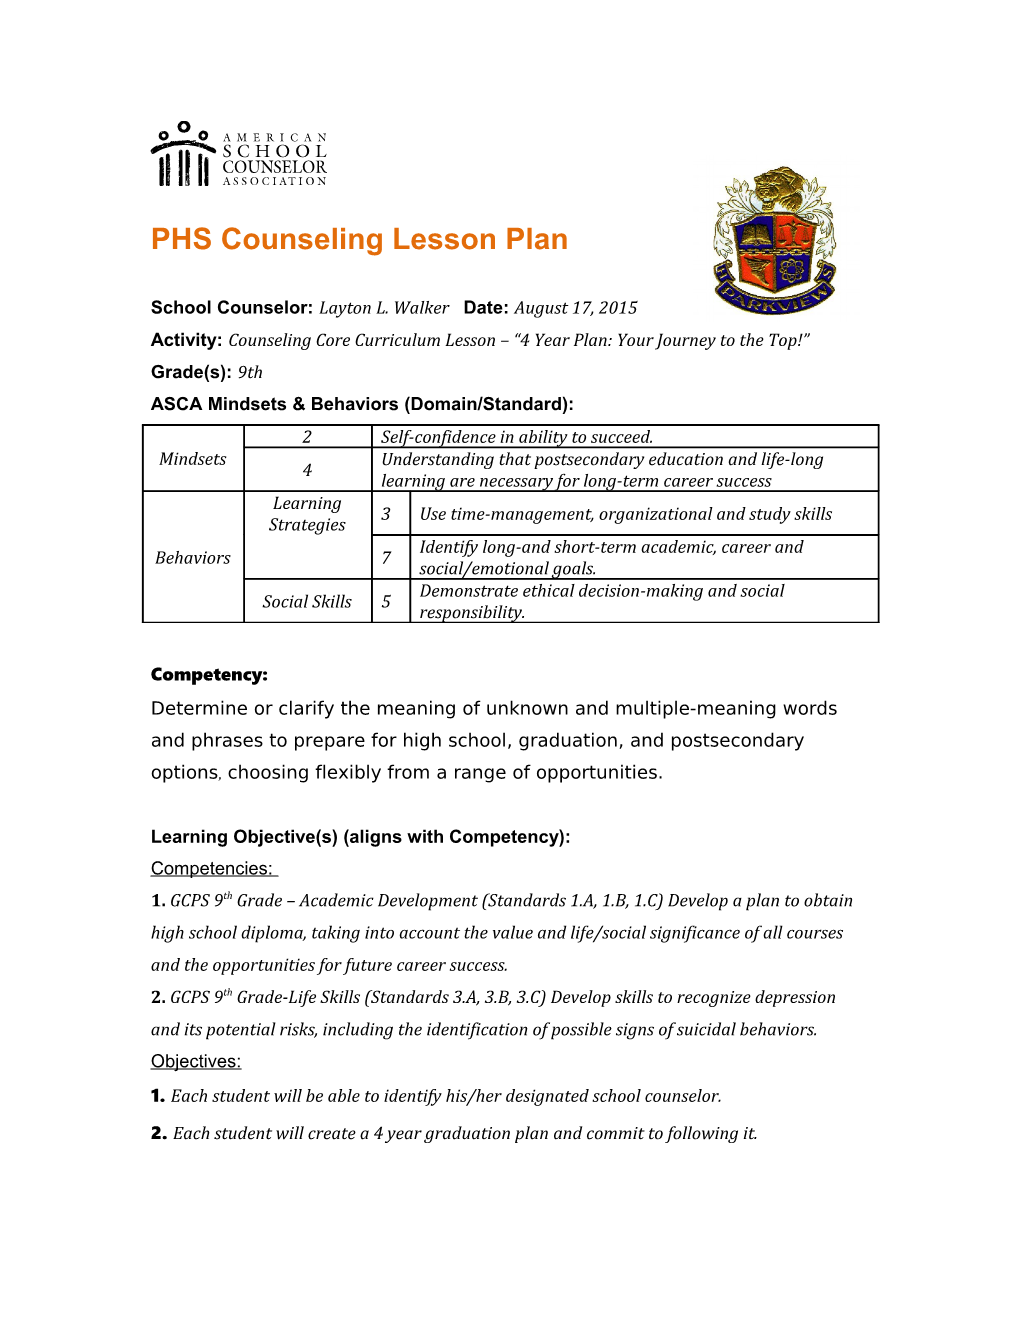 PHS Counseling Lesson Plan